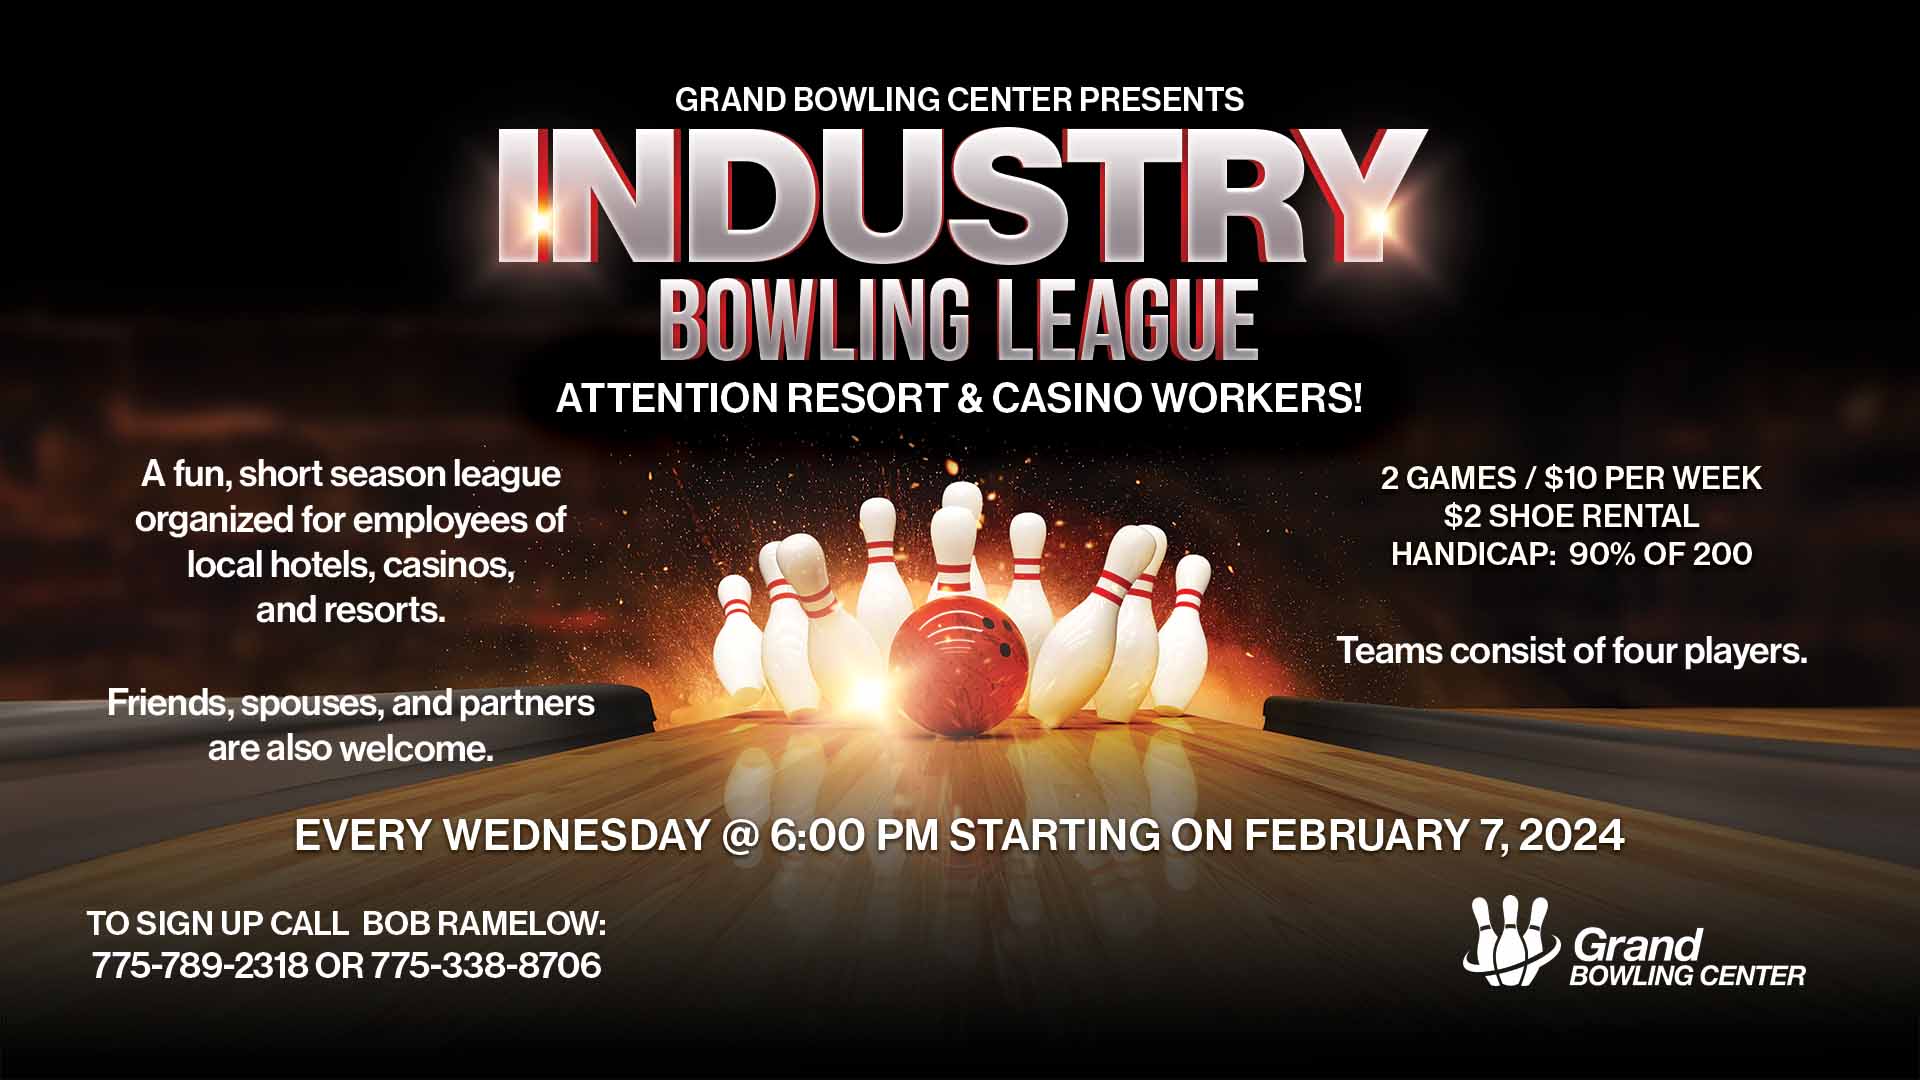 20240117_industry-worker-bowling-league-indoor-horizontal_v03_1920x1080